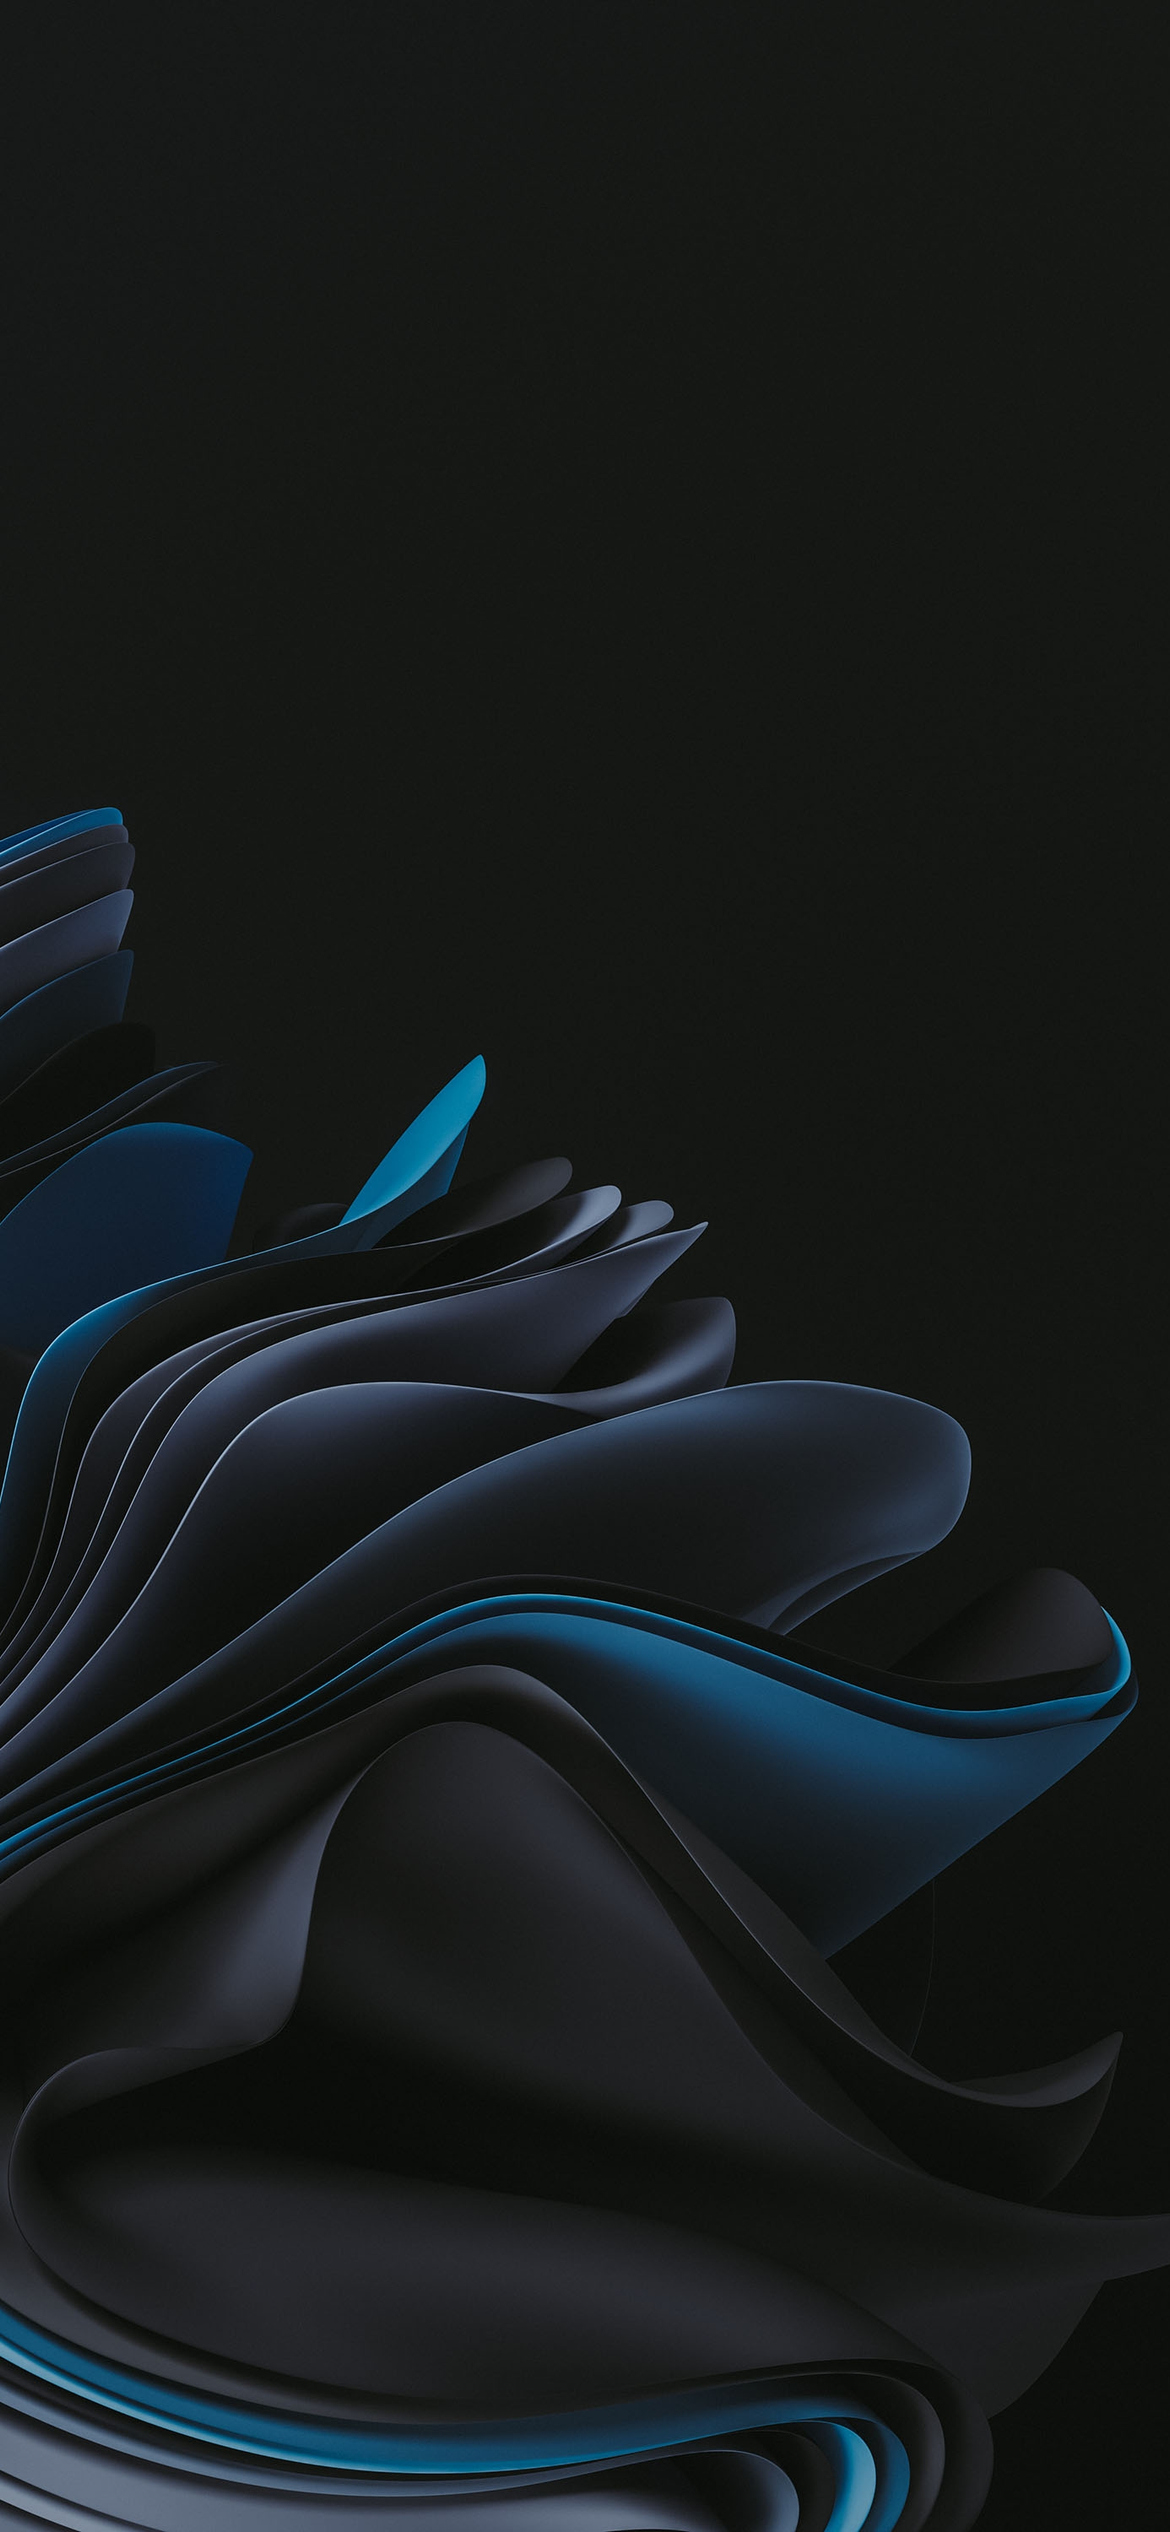 Download 3d abstract, Abstraction, 3D Wallpaper in 1170x2532 Resolution